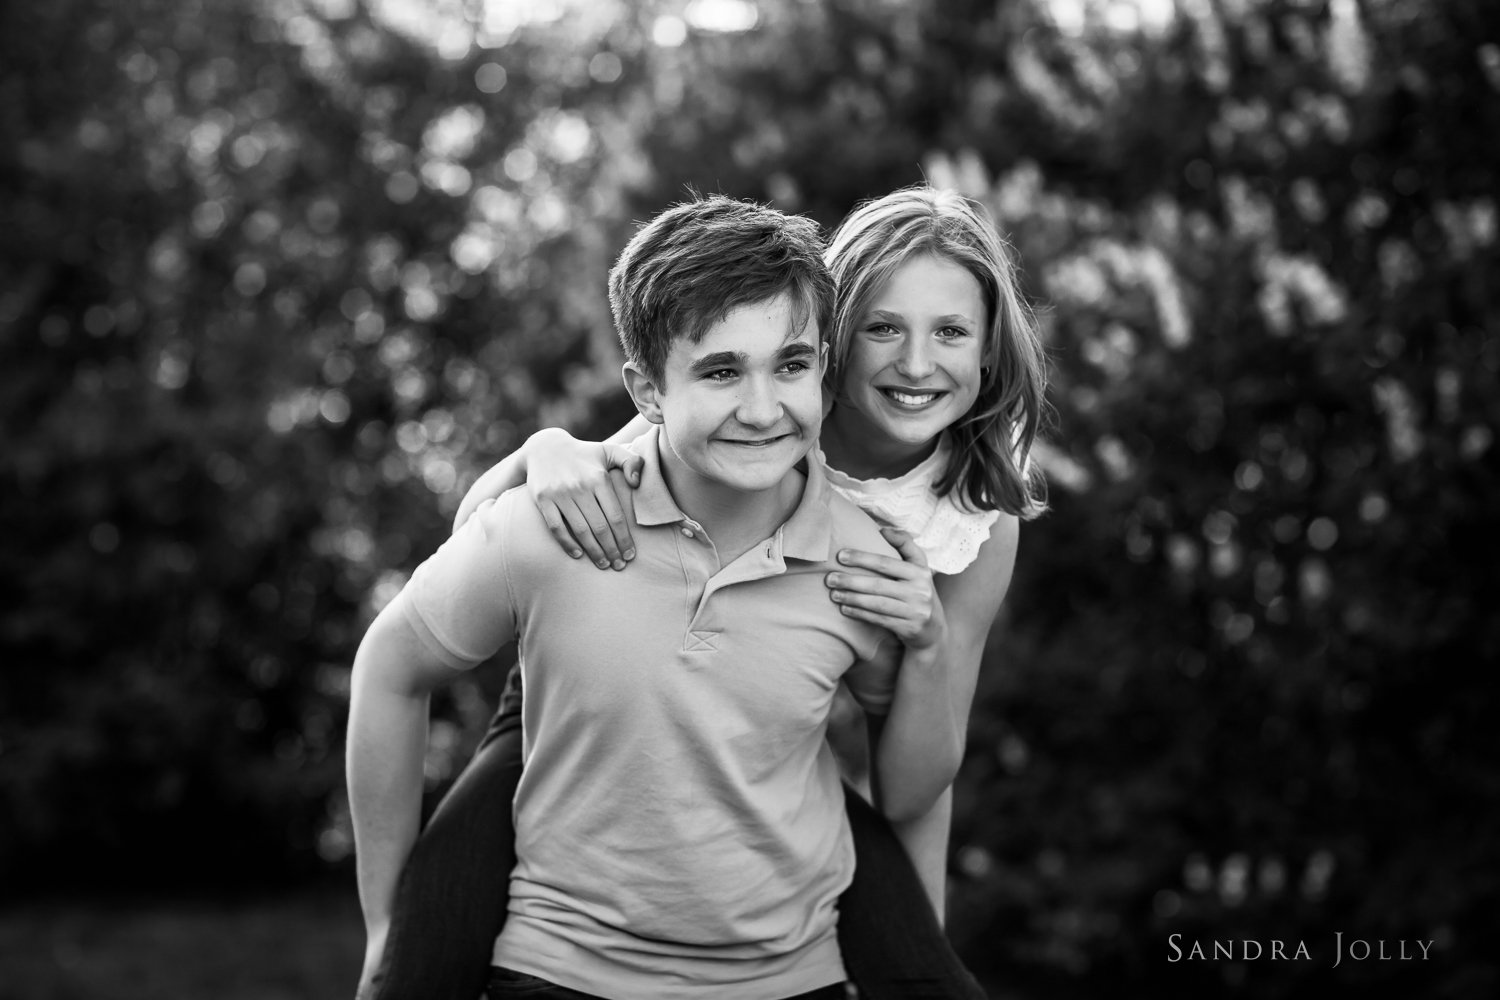 brother-and-sister-photo-stockholm-portrait-photographer.jpg